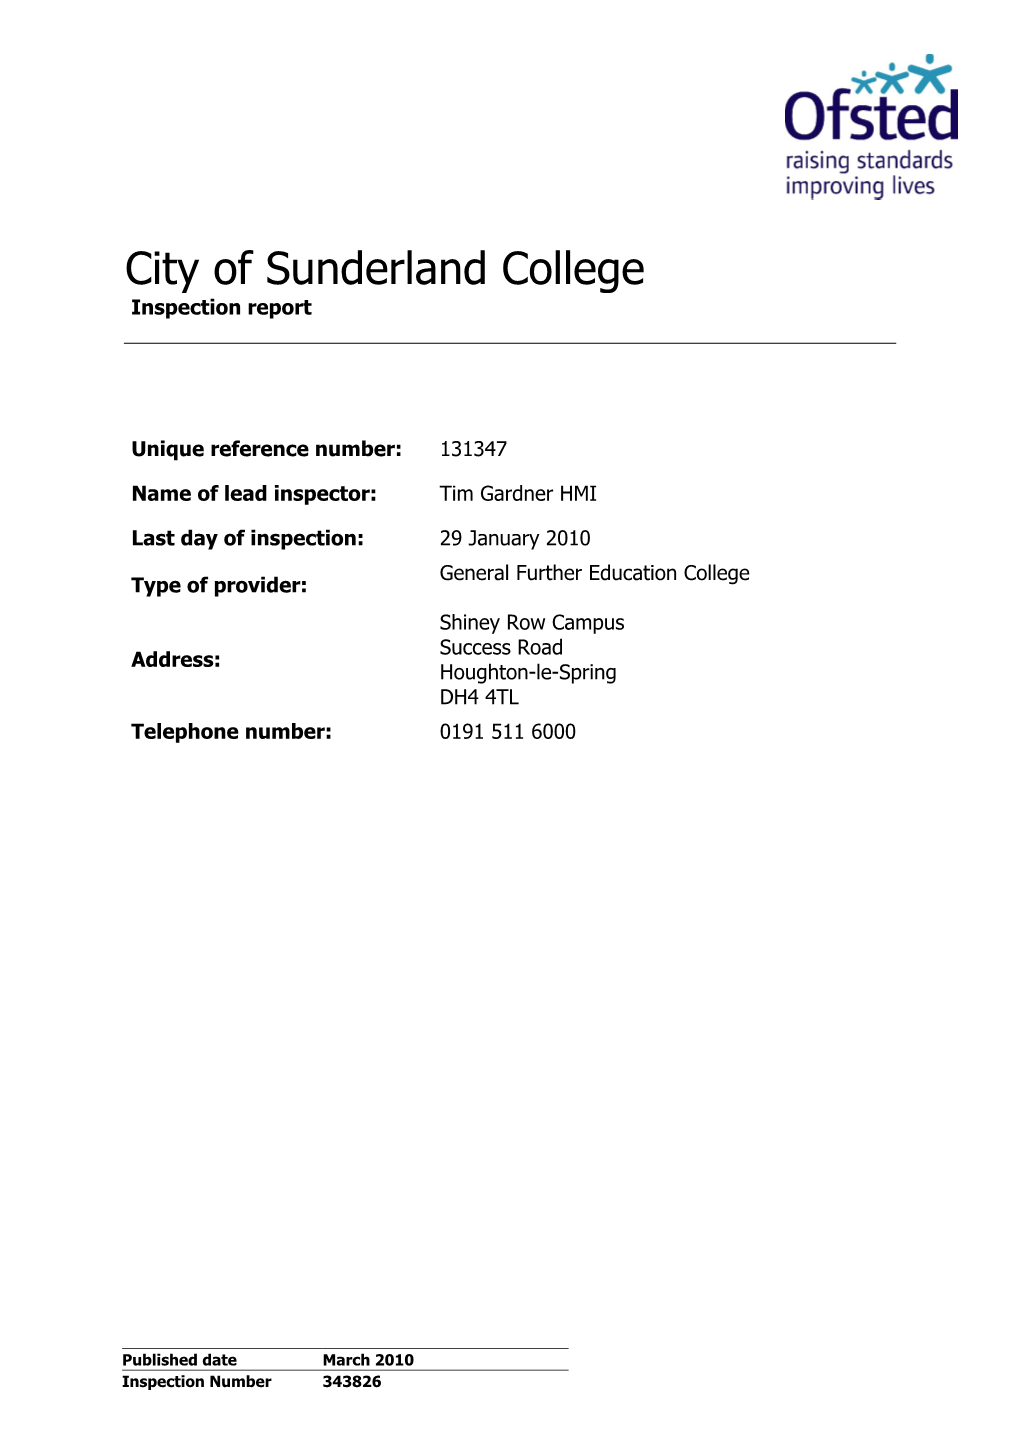 City of Sunderland College Inspection Report